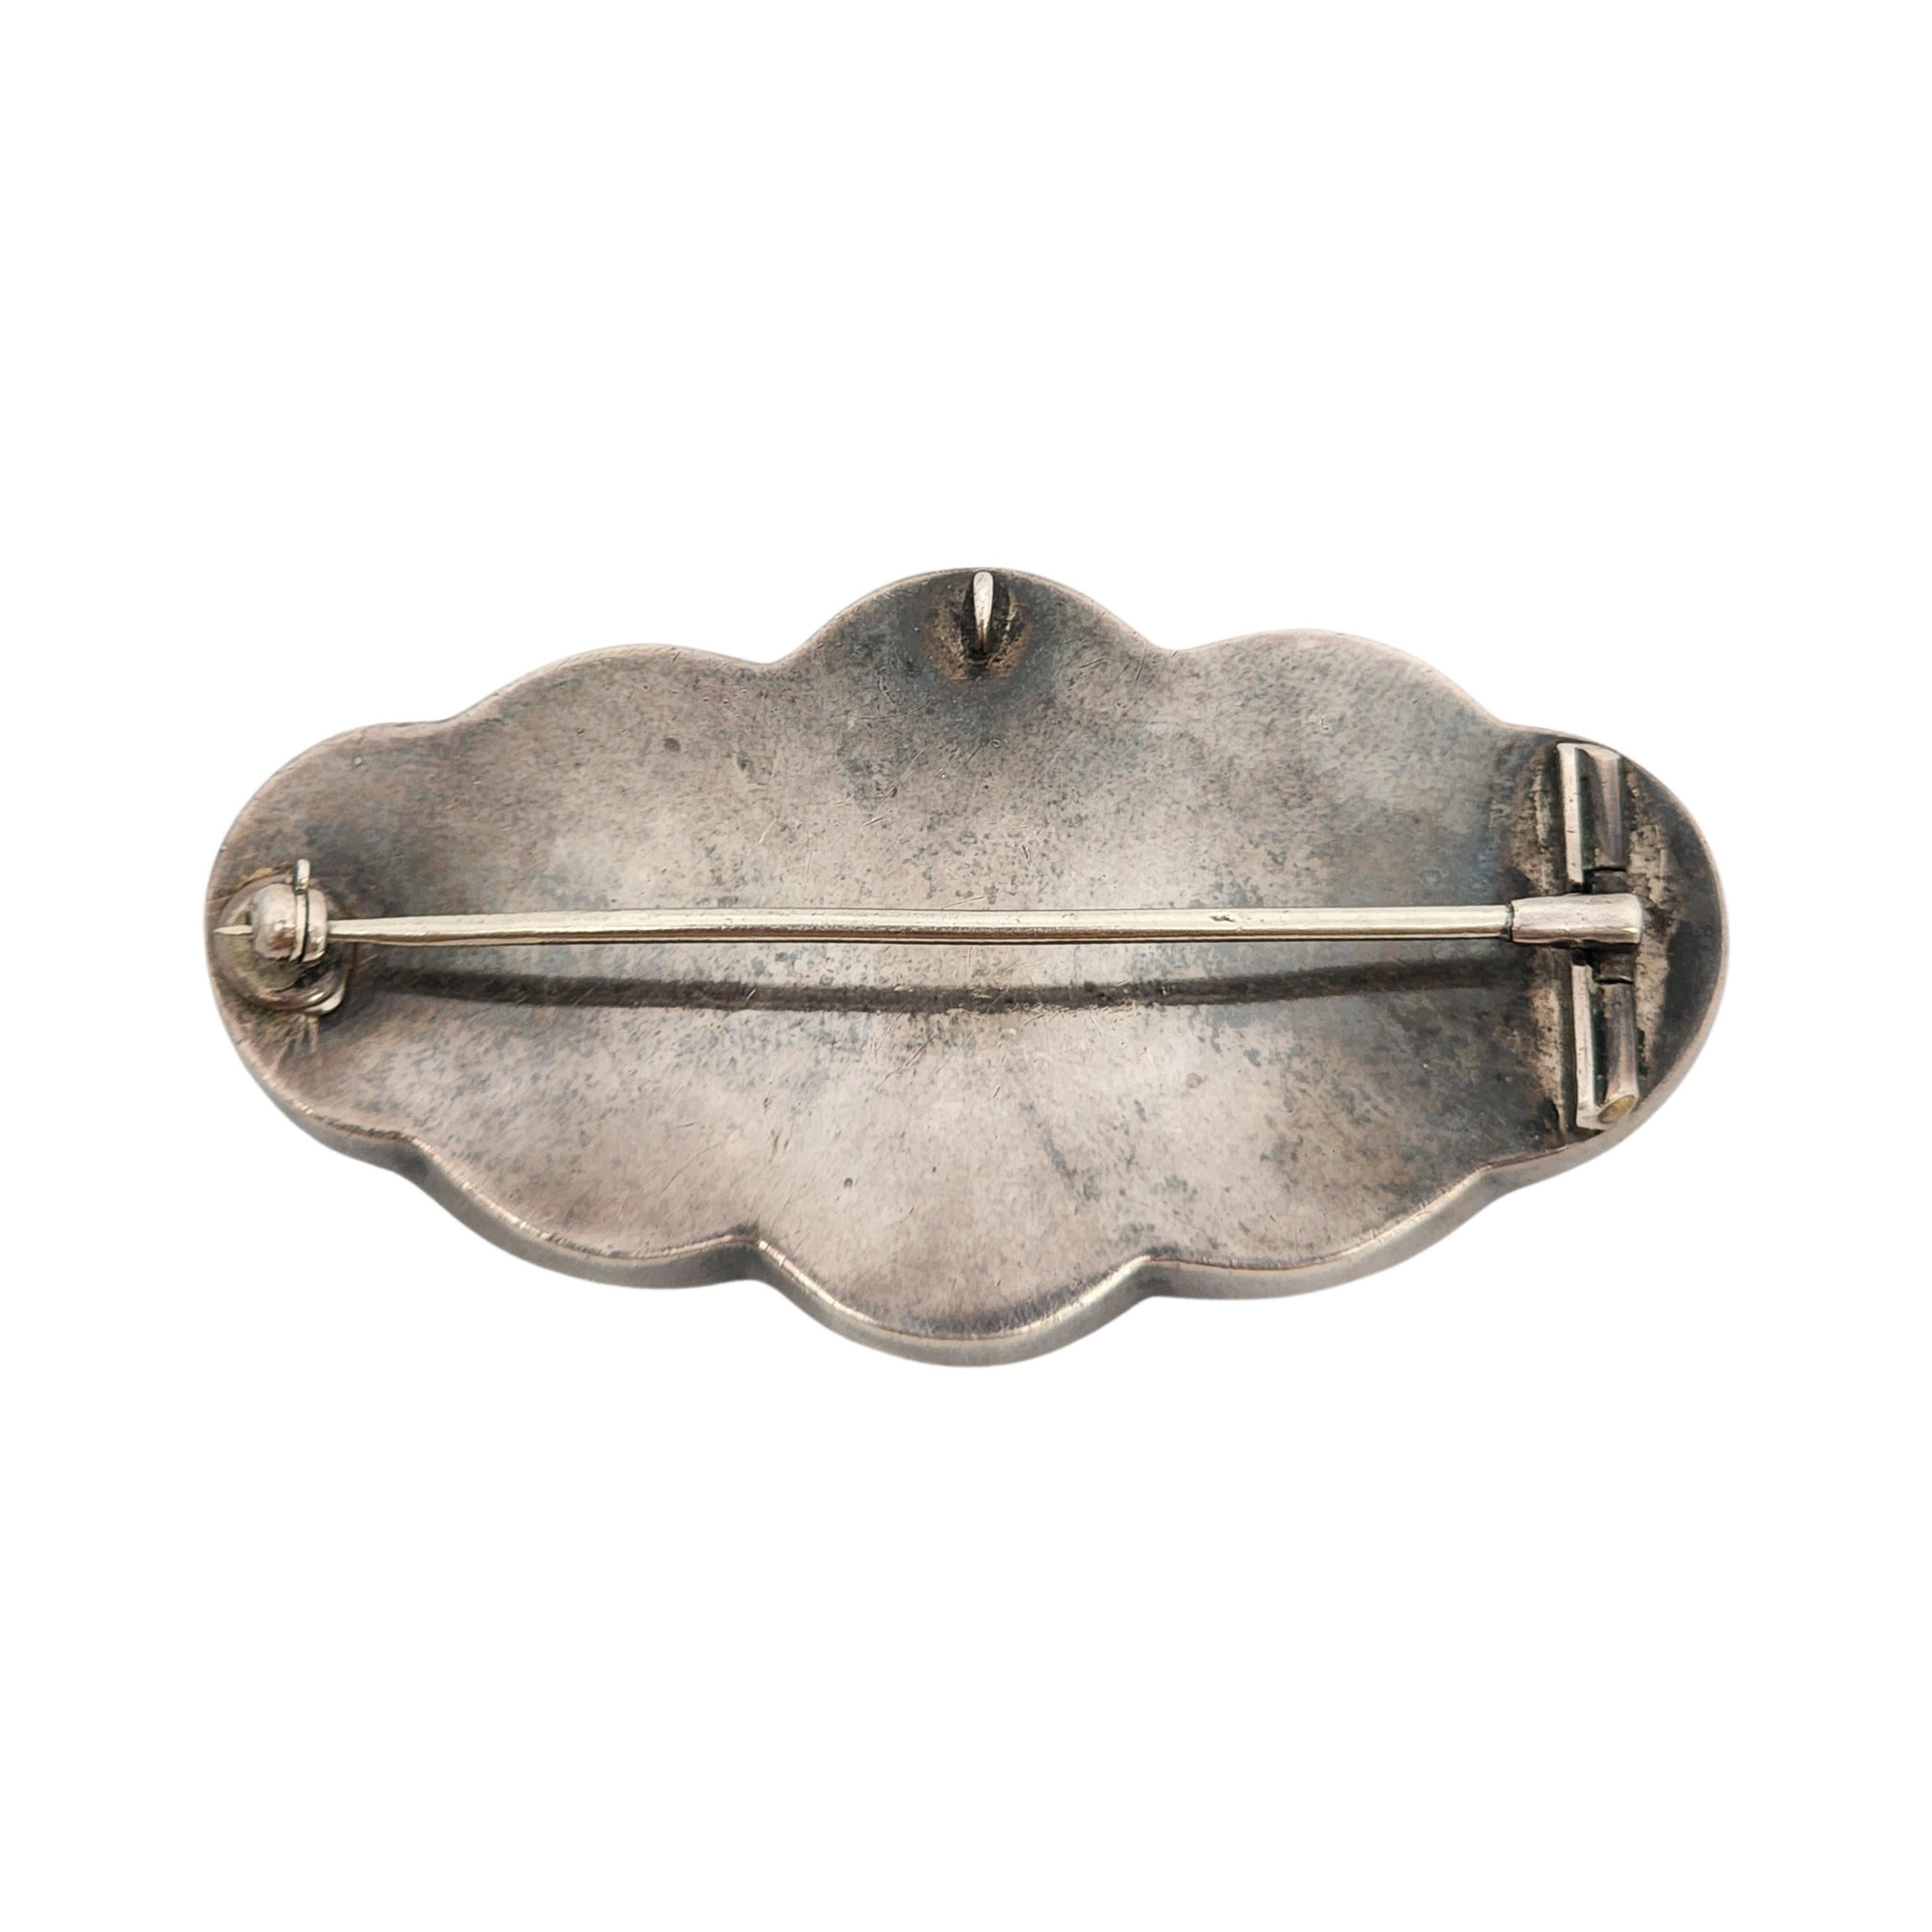 Antique Victorian Scottish agate silver pin/brooch/pendant.

Beautiful design featuring different colored agates with beautiful striations inlaid in silver with scalloped edges. These pieces were poplar in the mid-to late 1800s. Each piece is